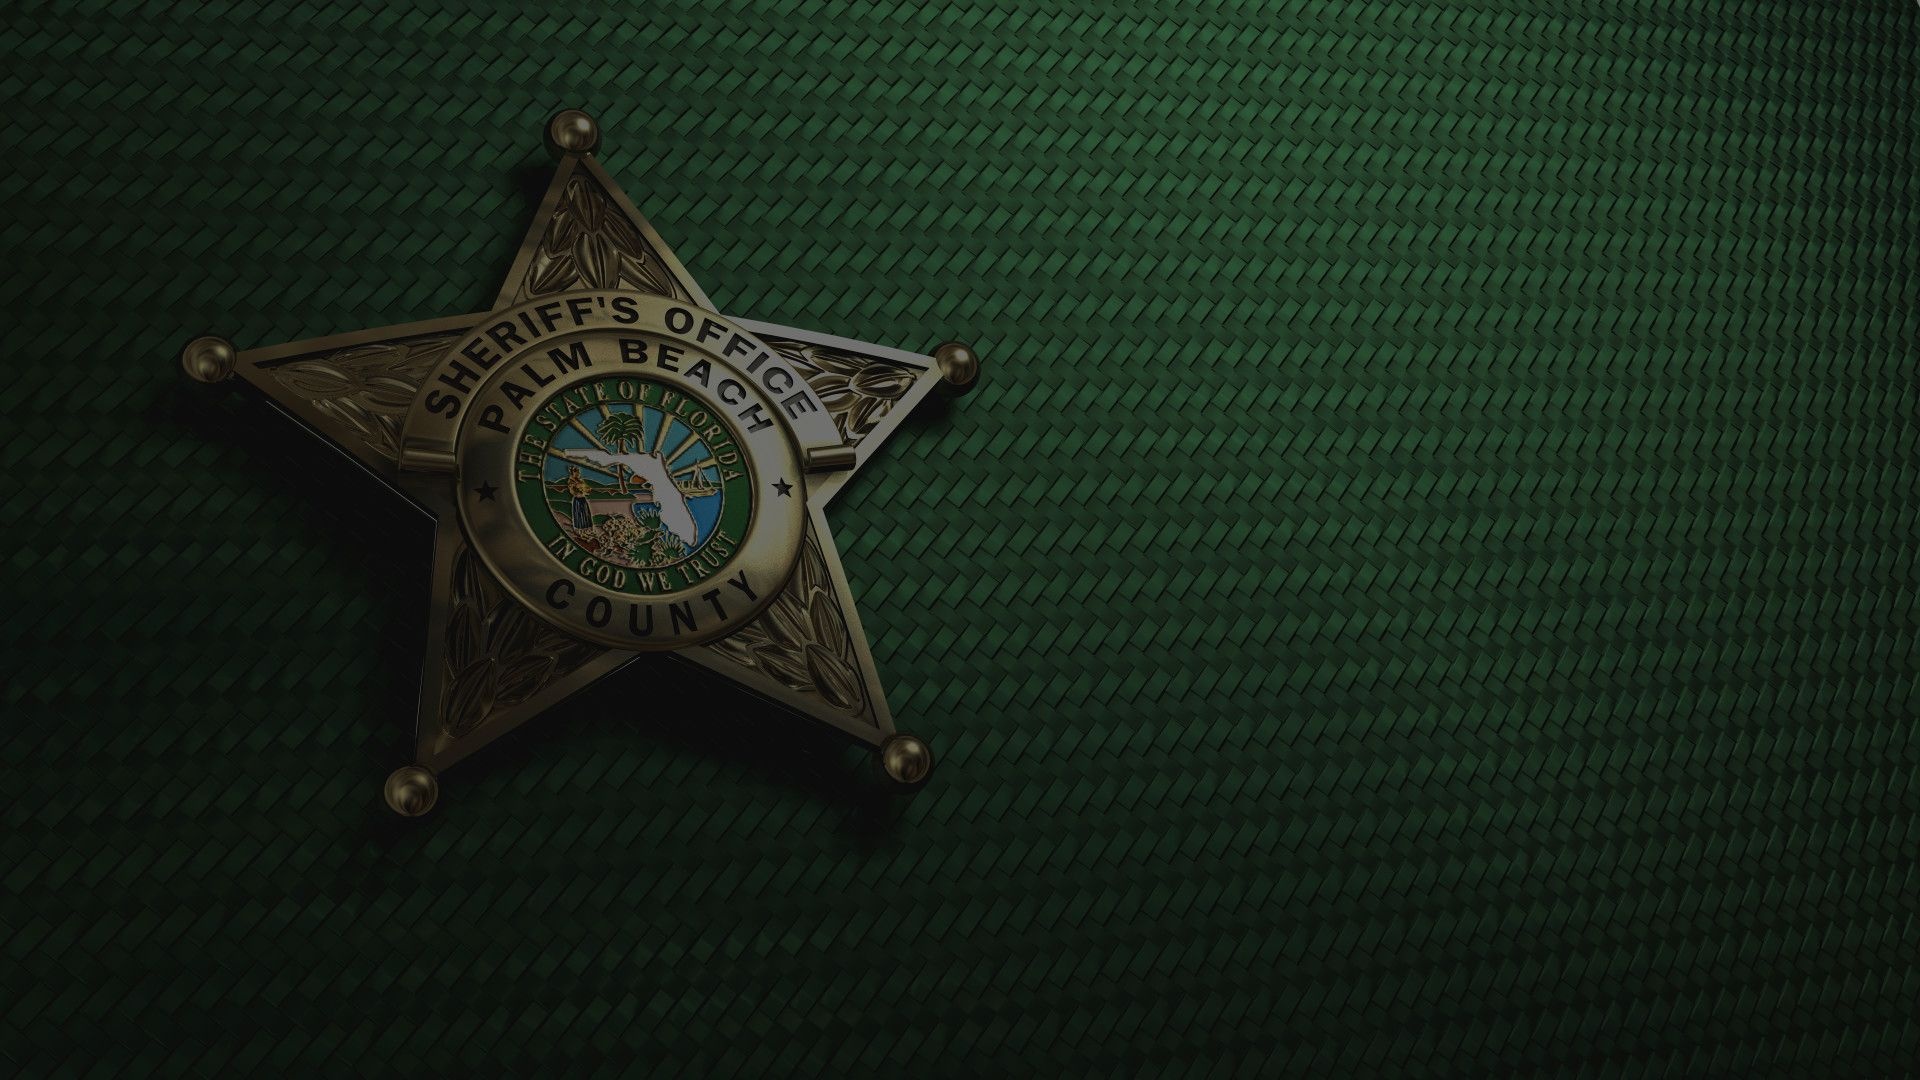 Sheriff star wallpapers, Law enforcement, Western style, Badge of authority, 1920x1080 Full HD Desktop